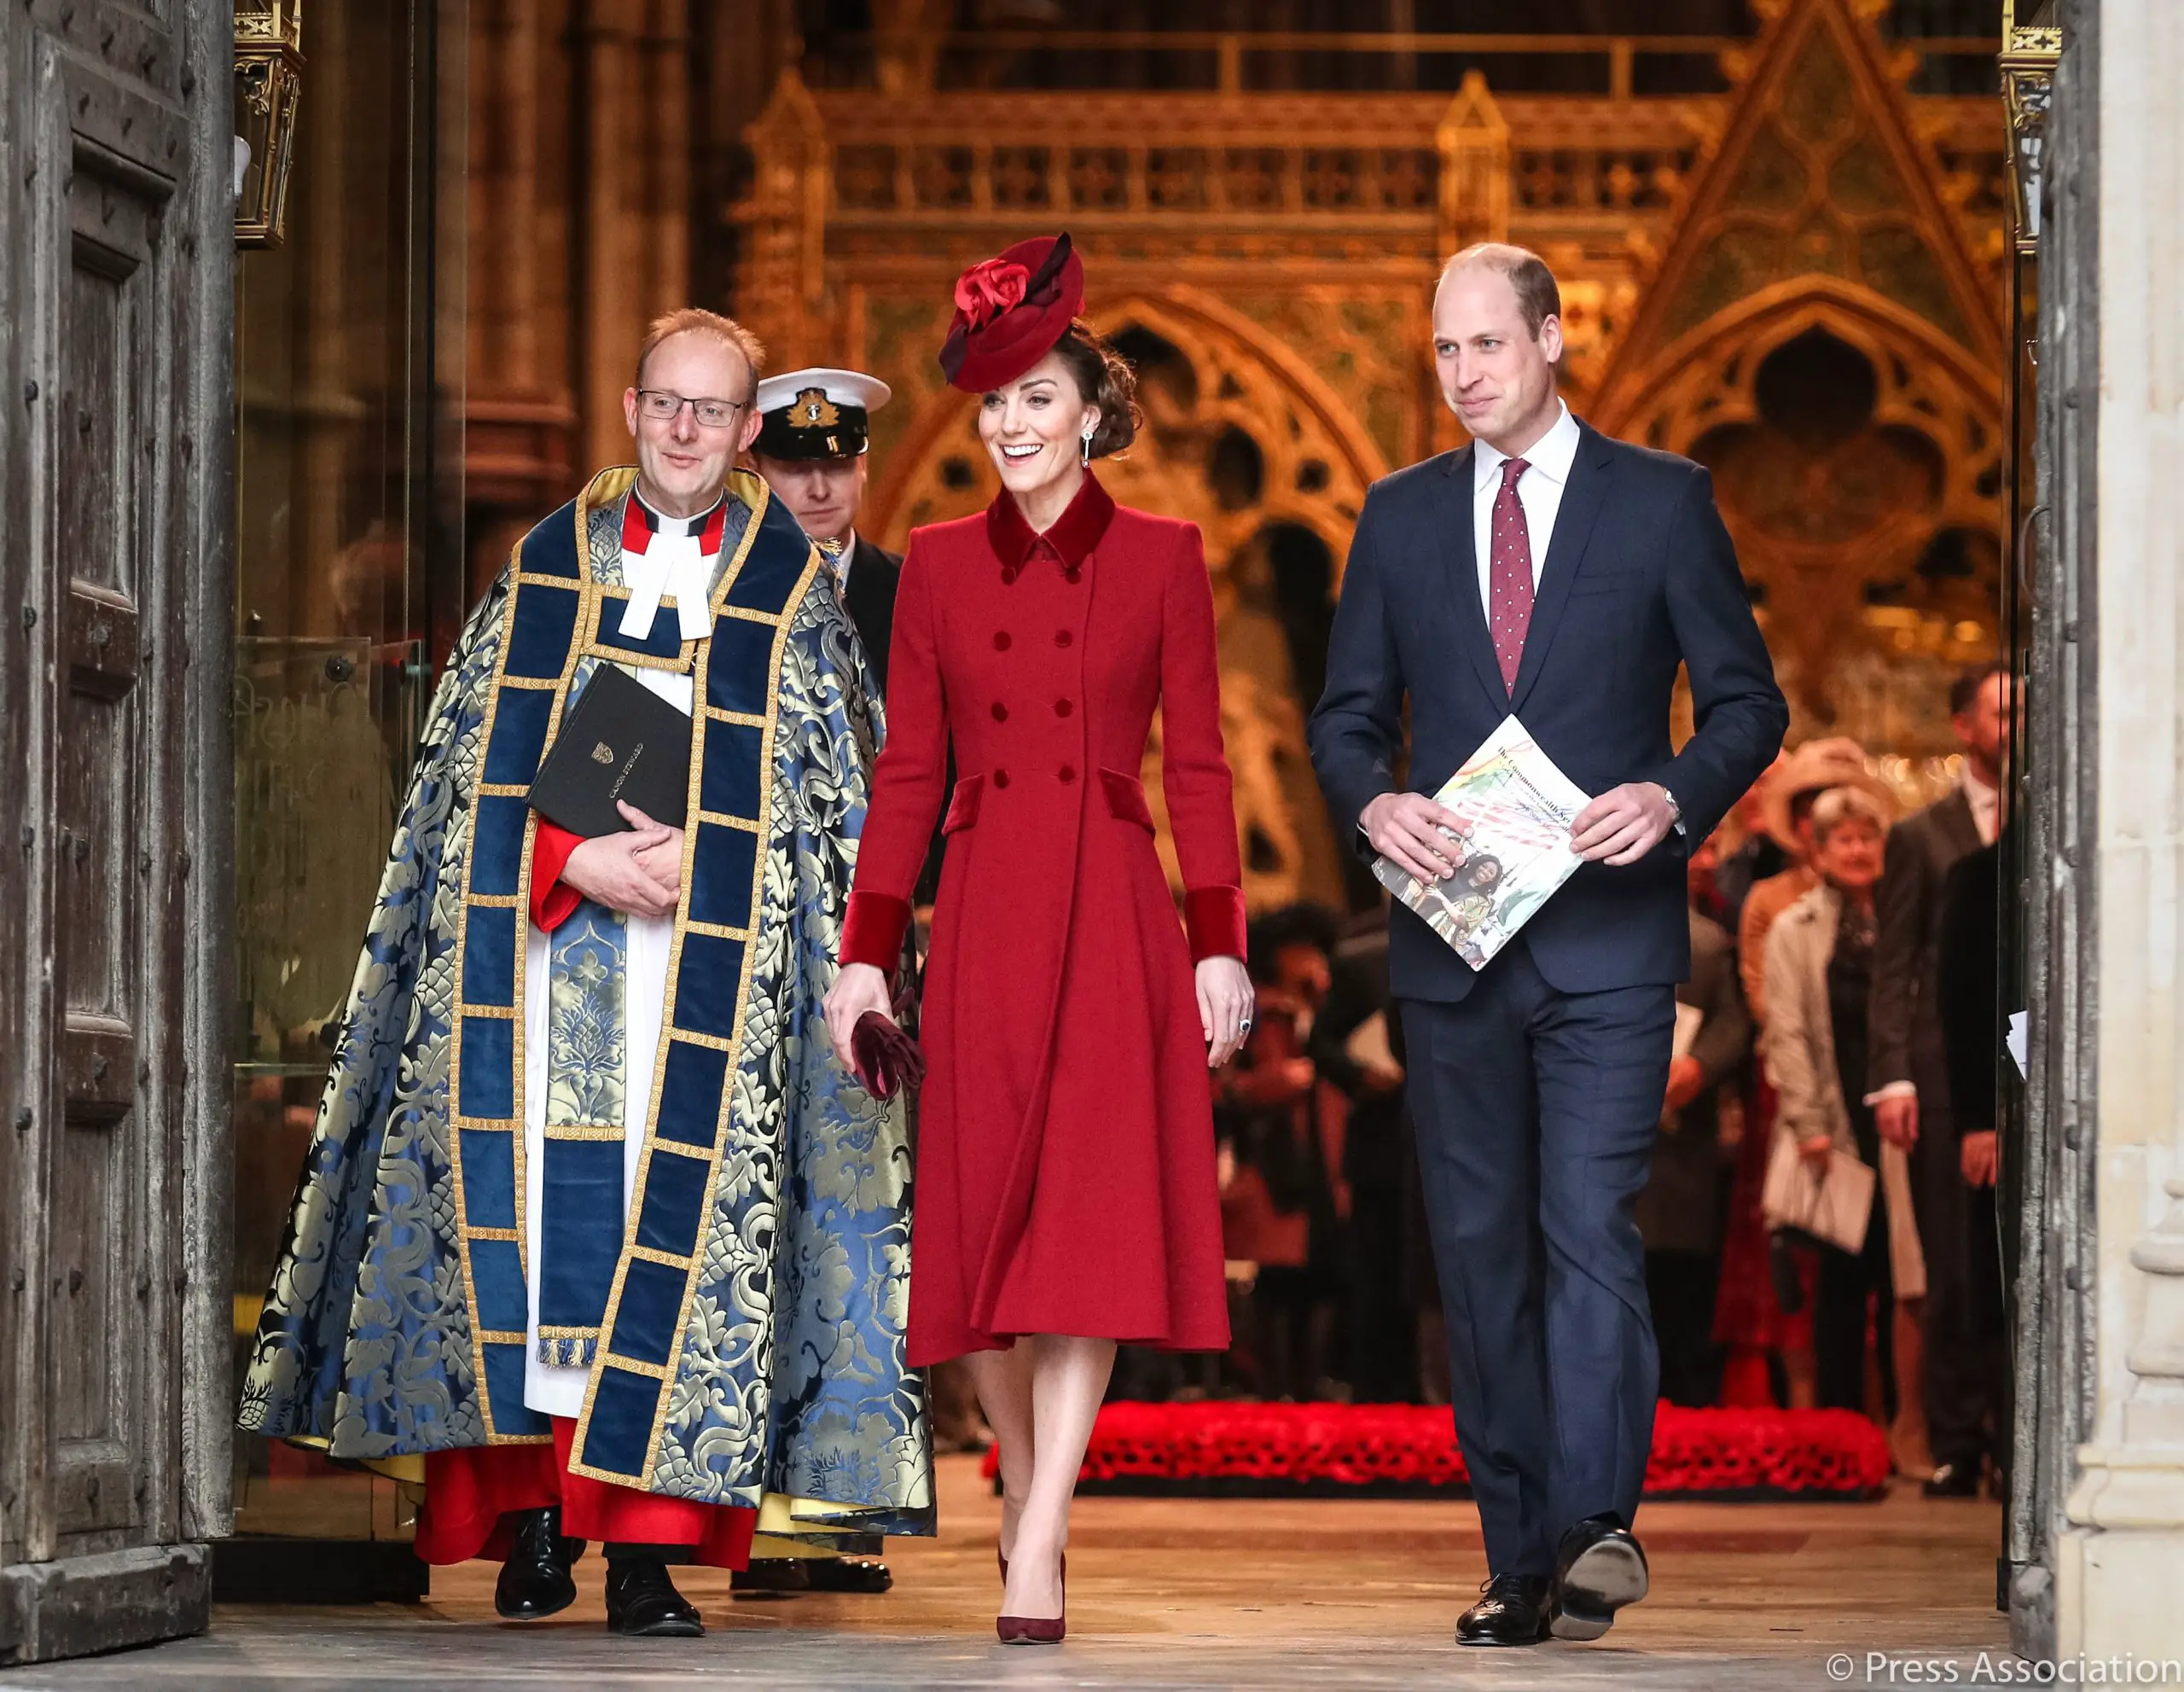 The Duchess of Cambridge wore Red catherine walker coat at the commonwealth day service